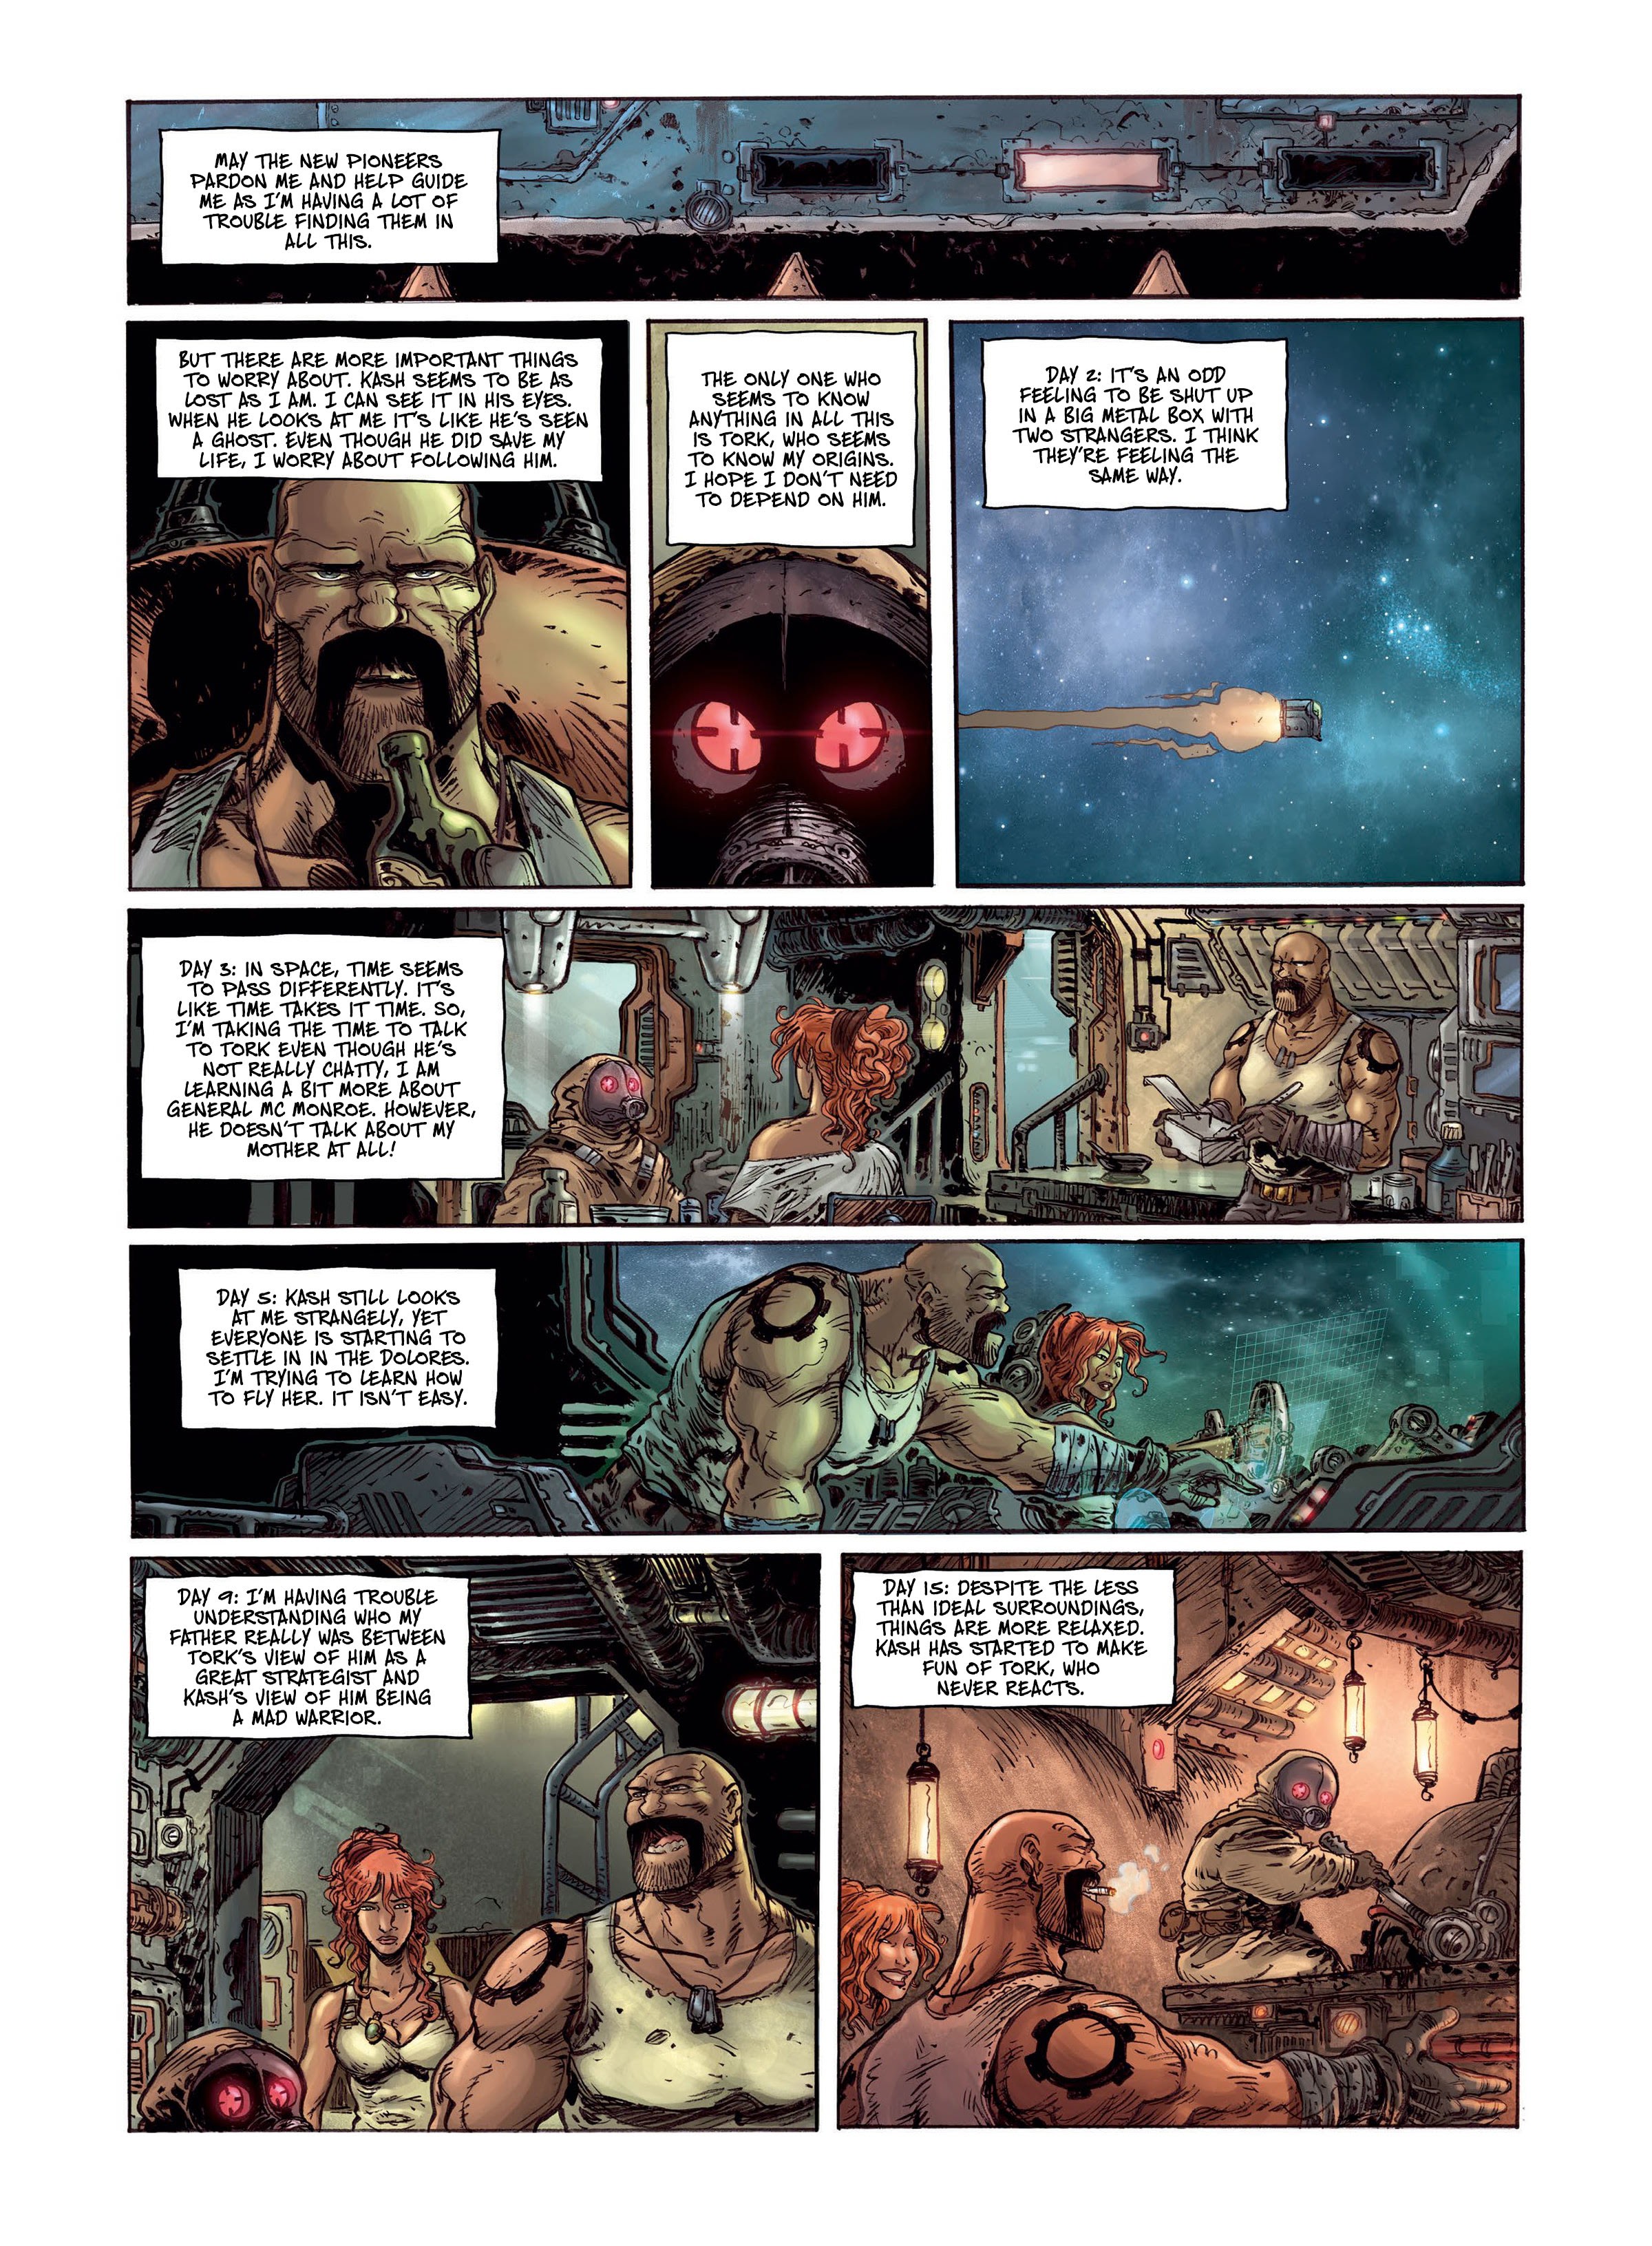 Read online S.P.U. Dolores: The New Pioneers' Trial comic -  Issue # Full - 30